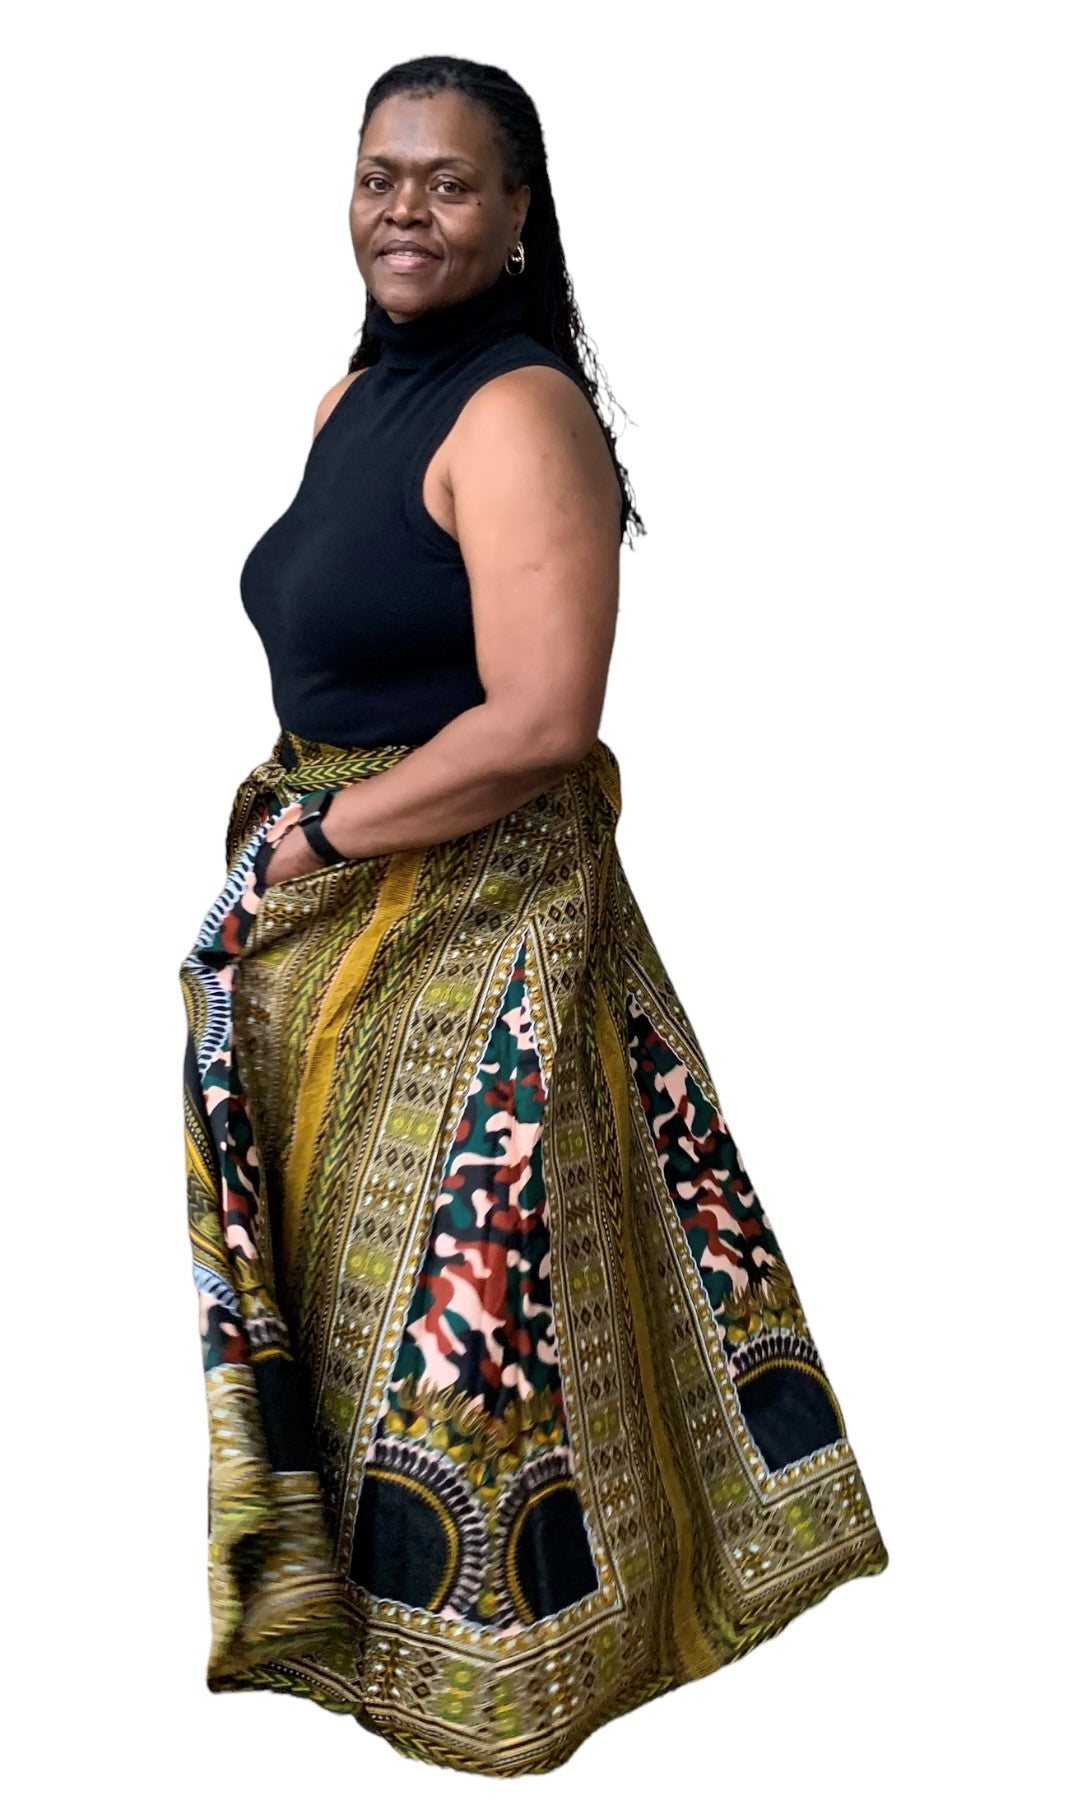 8 PANEL AFRICAN PRINT SKIRT - AUTHENTIC AFRICAN WAX